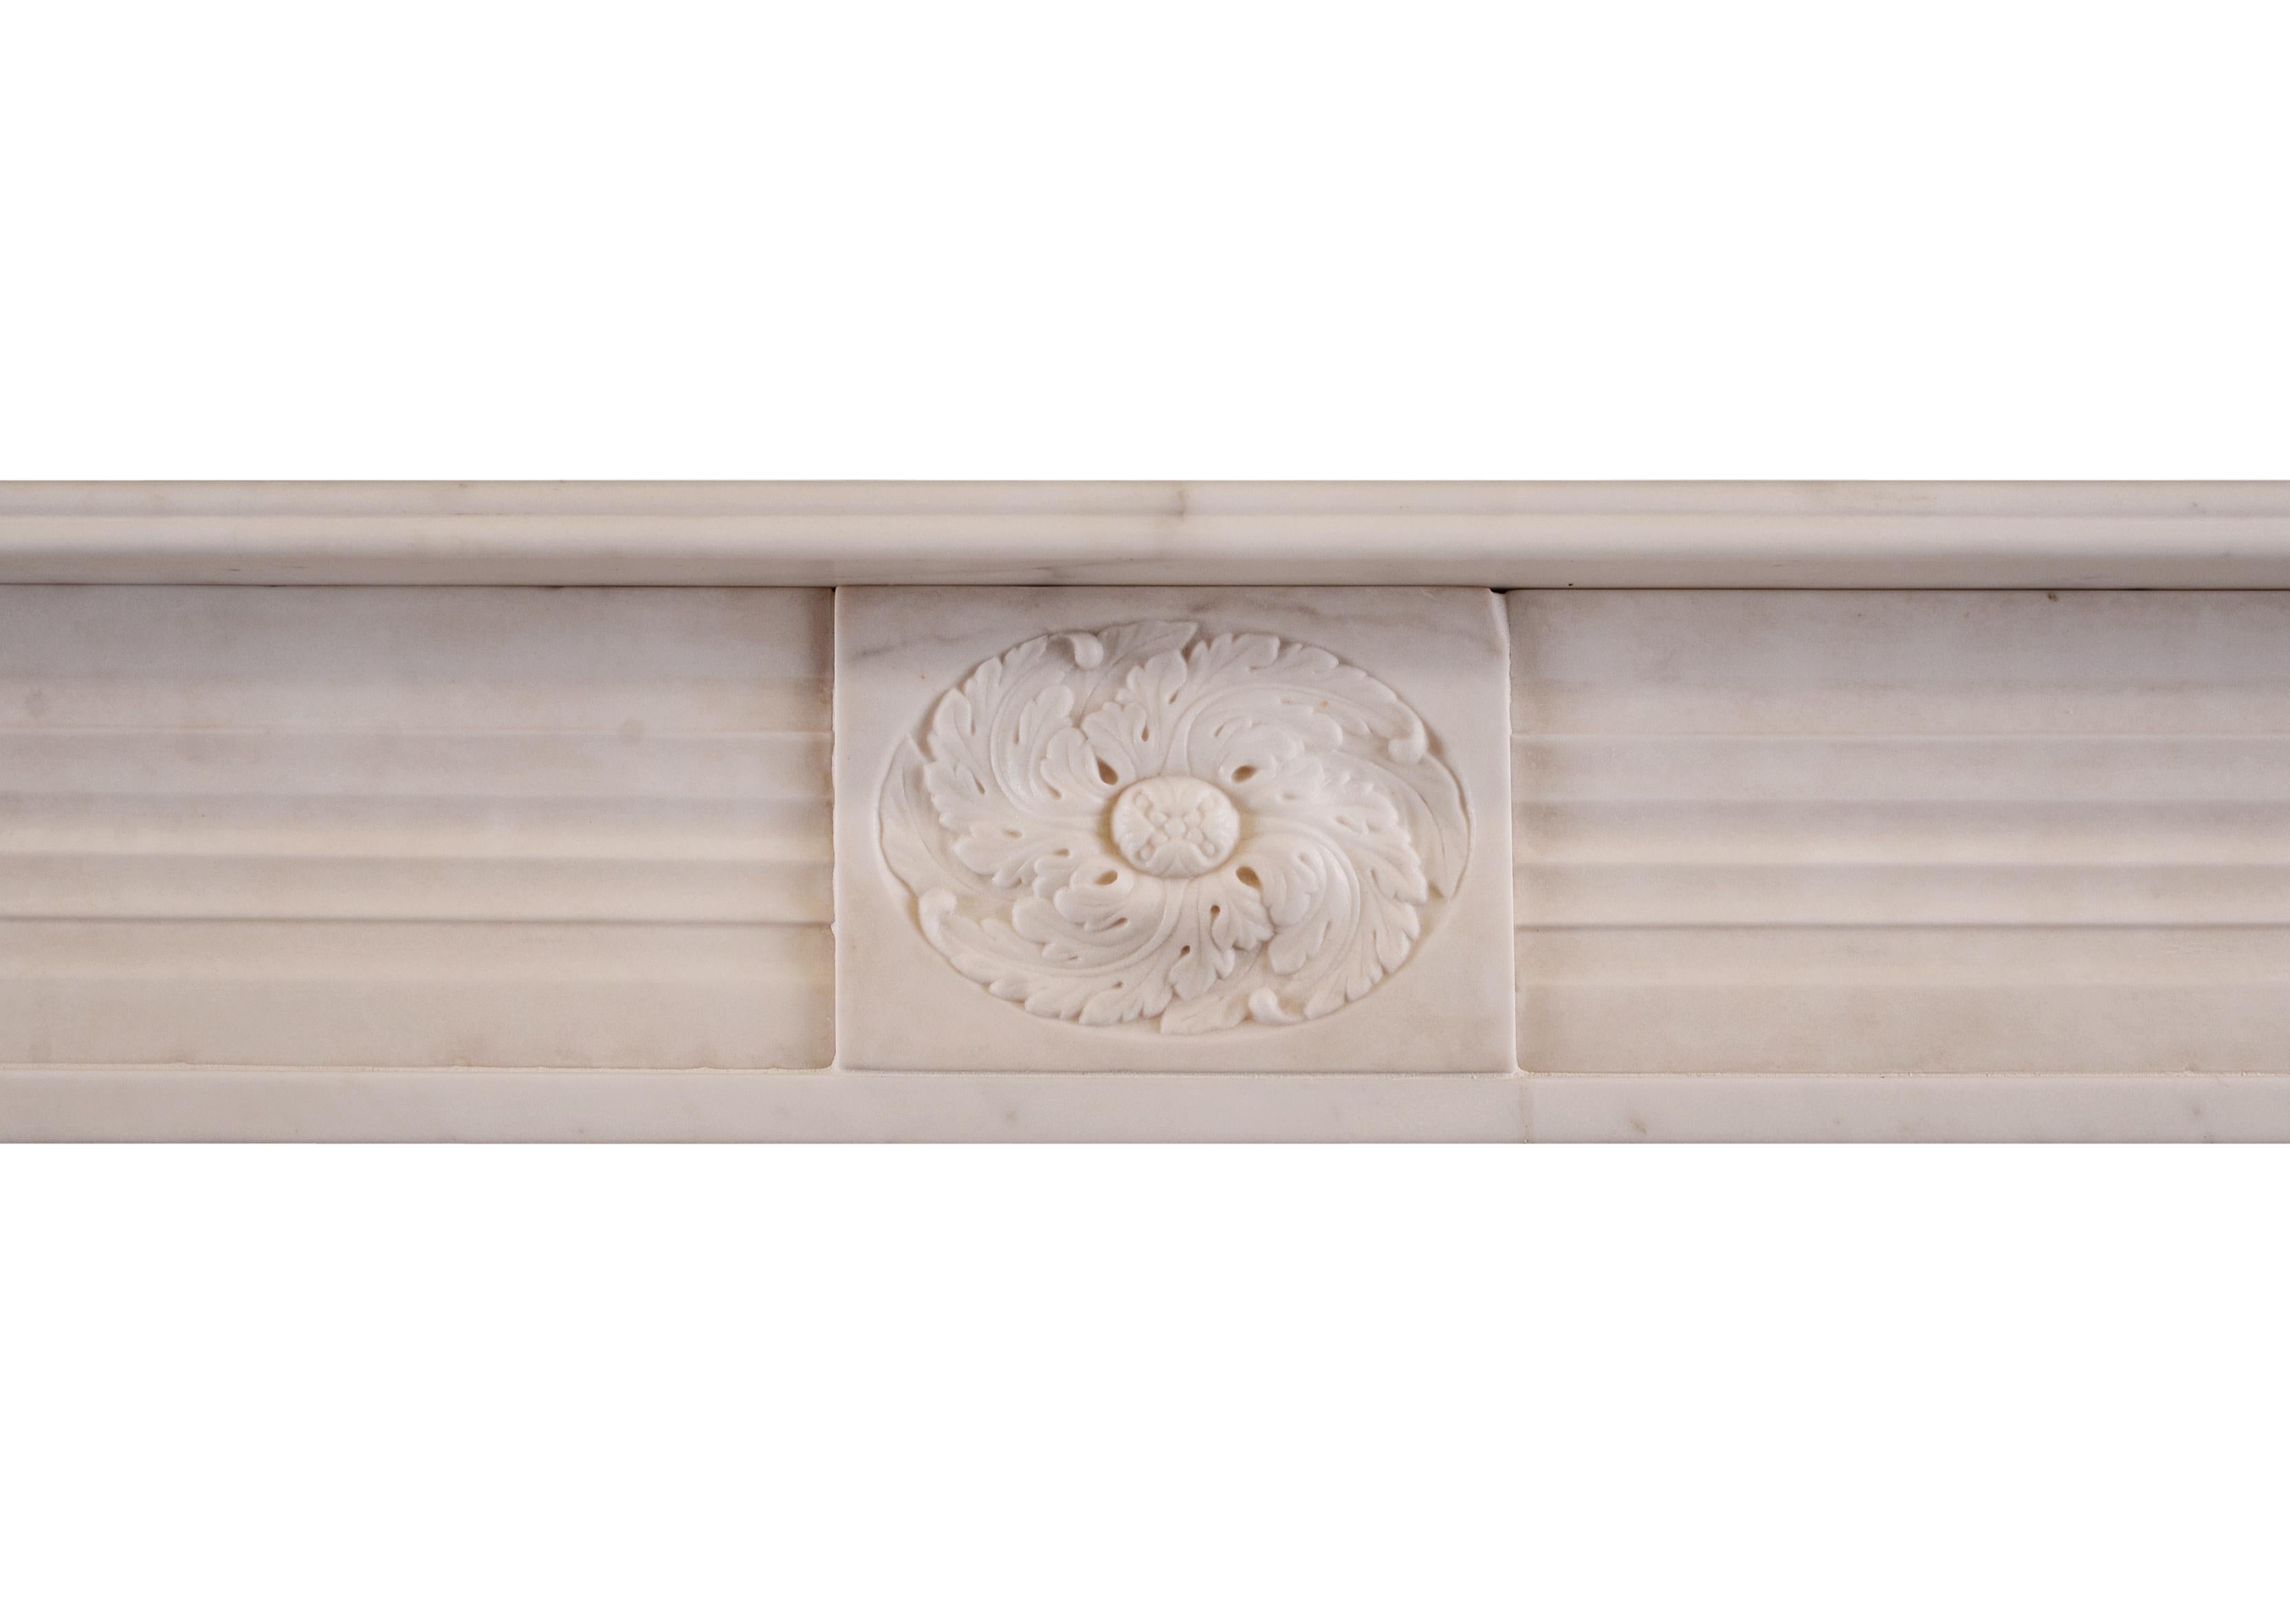 A period English Regency fireplace in statuary marble. The jambs with half rounded reeds surmounted by roundel end blockings. Carved central paterae to frieze, English, circa 1820. One of a very near pair with stock no 3960.

Measurements:
Shelf